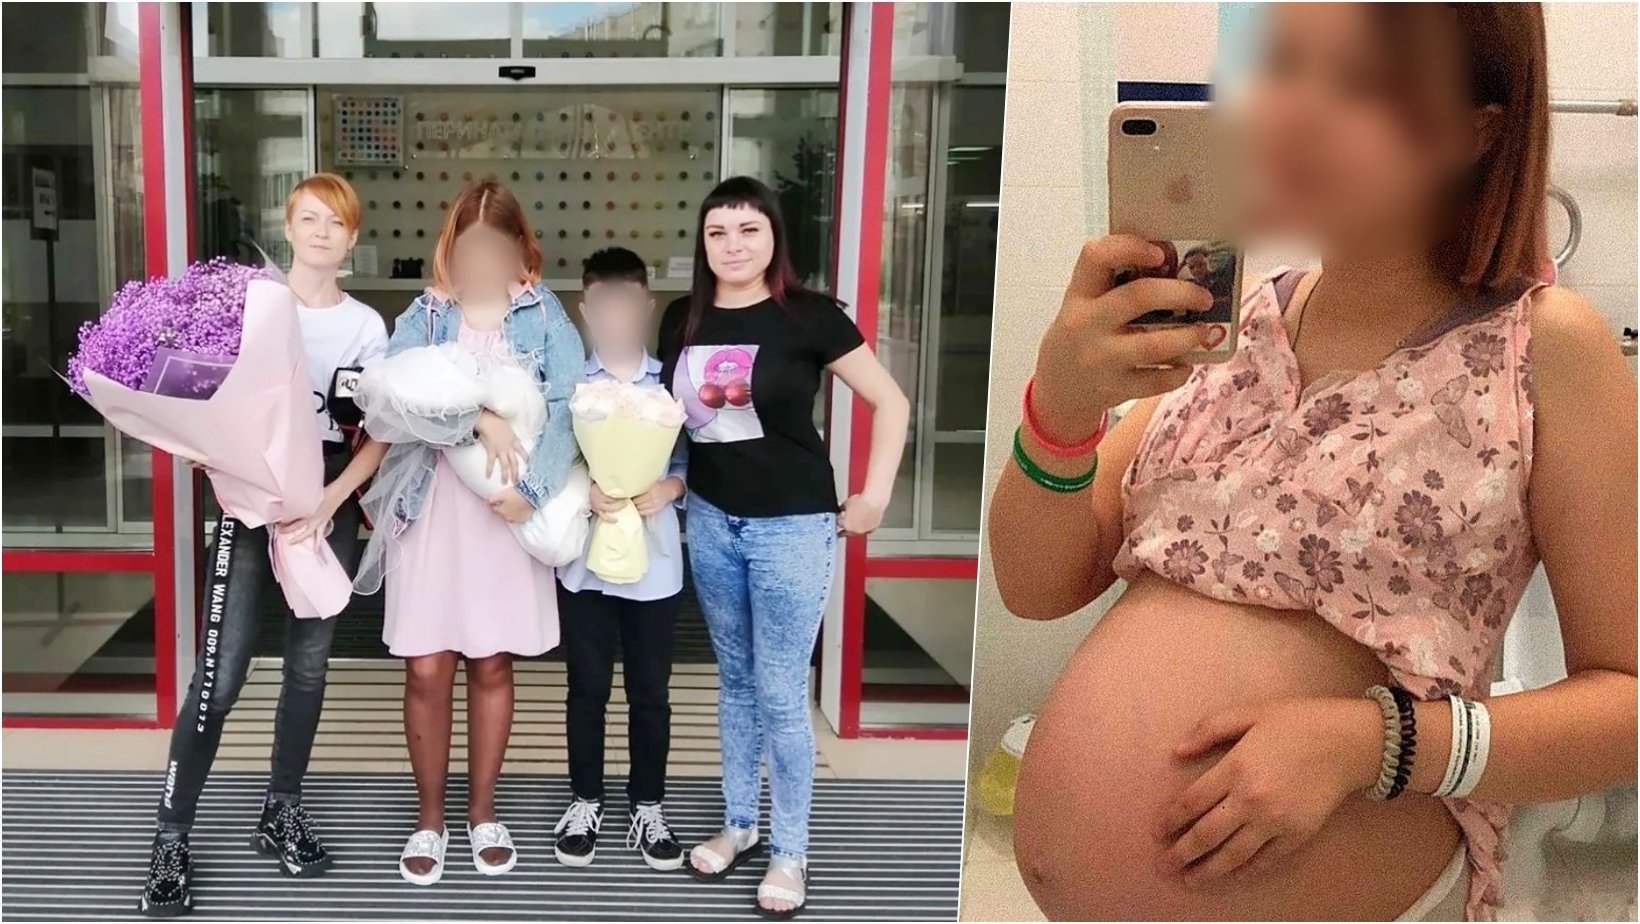 6 facebook cover 4.jpg?resize=412,275 - Teenage Girl Who Previously Claims She Gave Birth To 10-Year-Old Boy’s Baby Announced Second Pregnancy